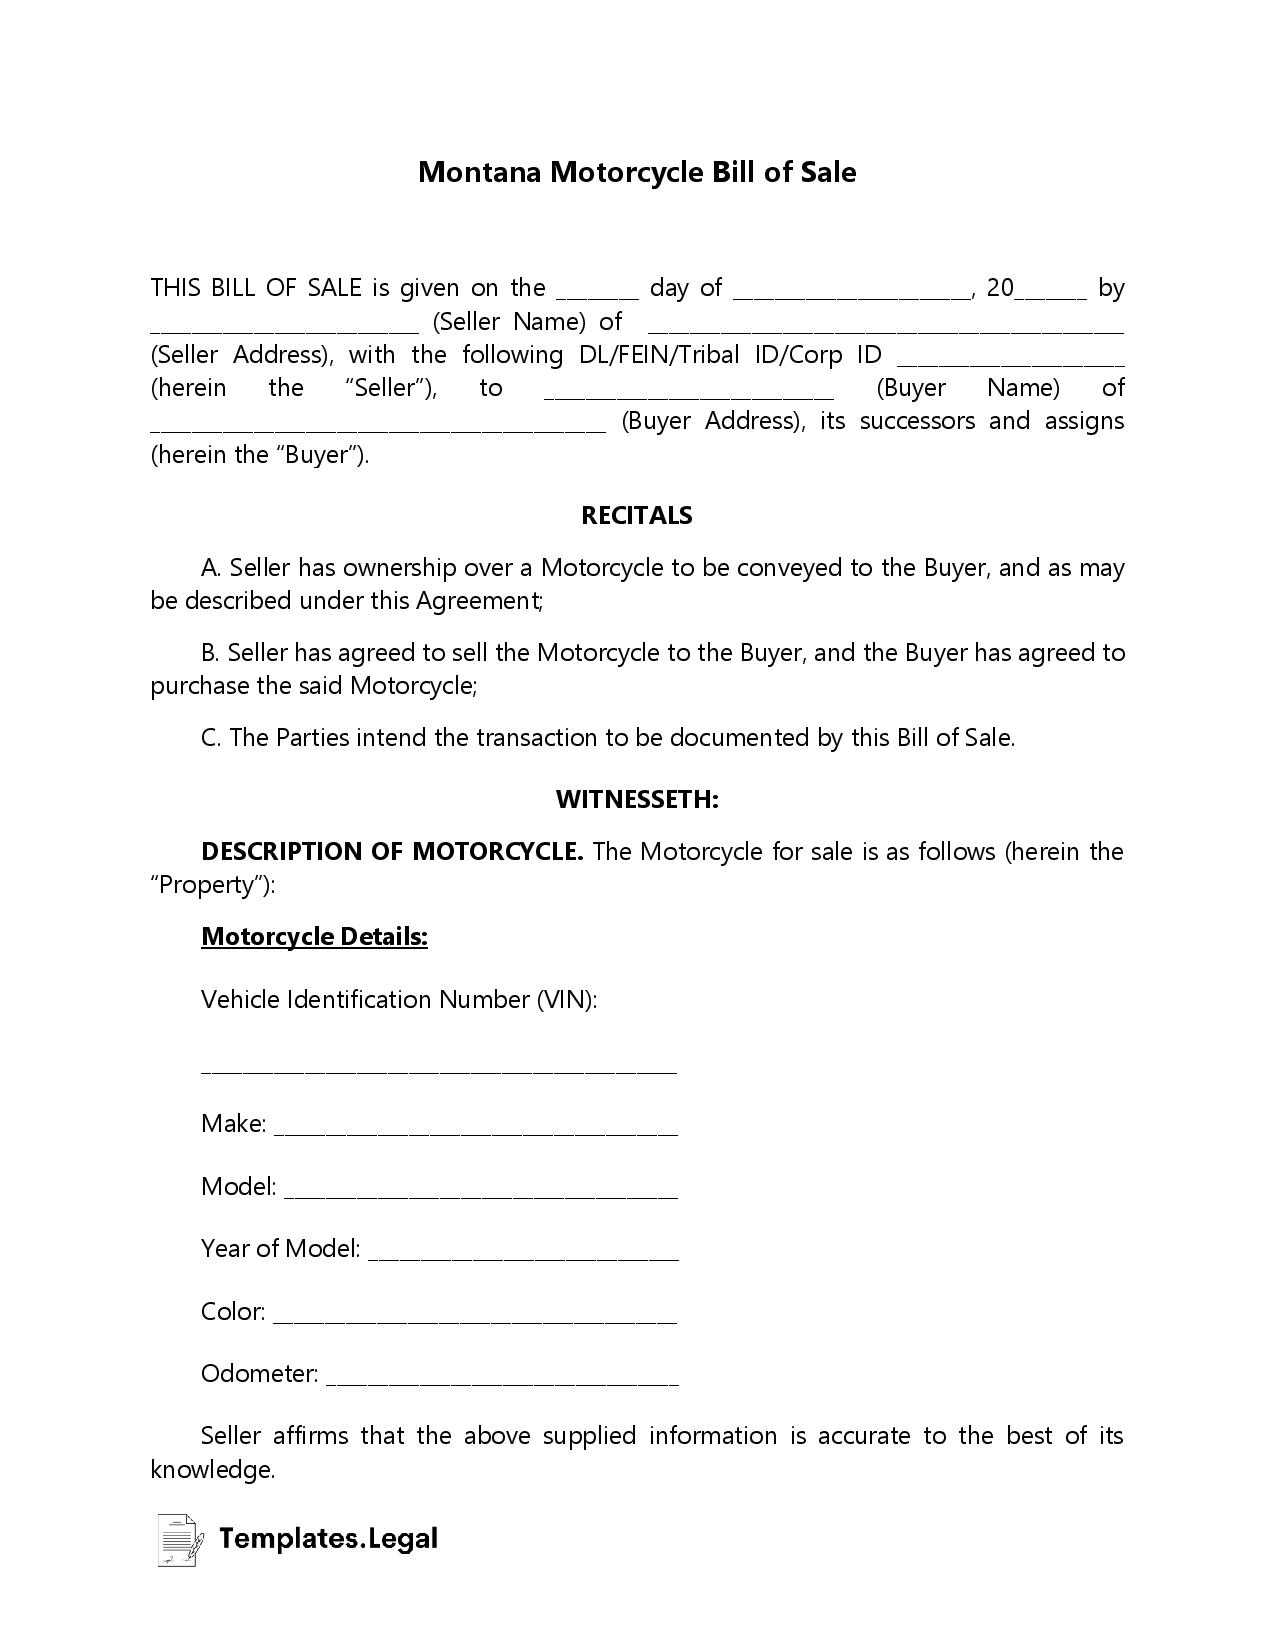 Montana Motorcycle Bill of Sale - Templates.Legal